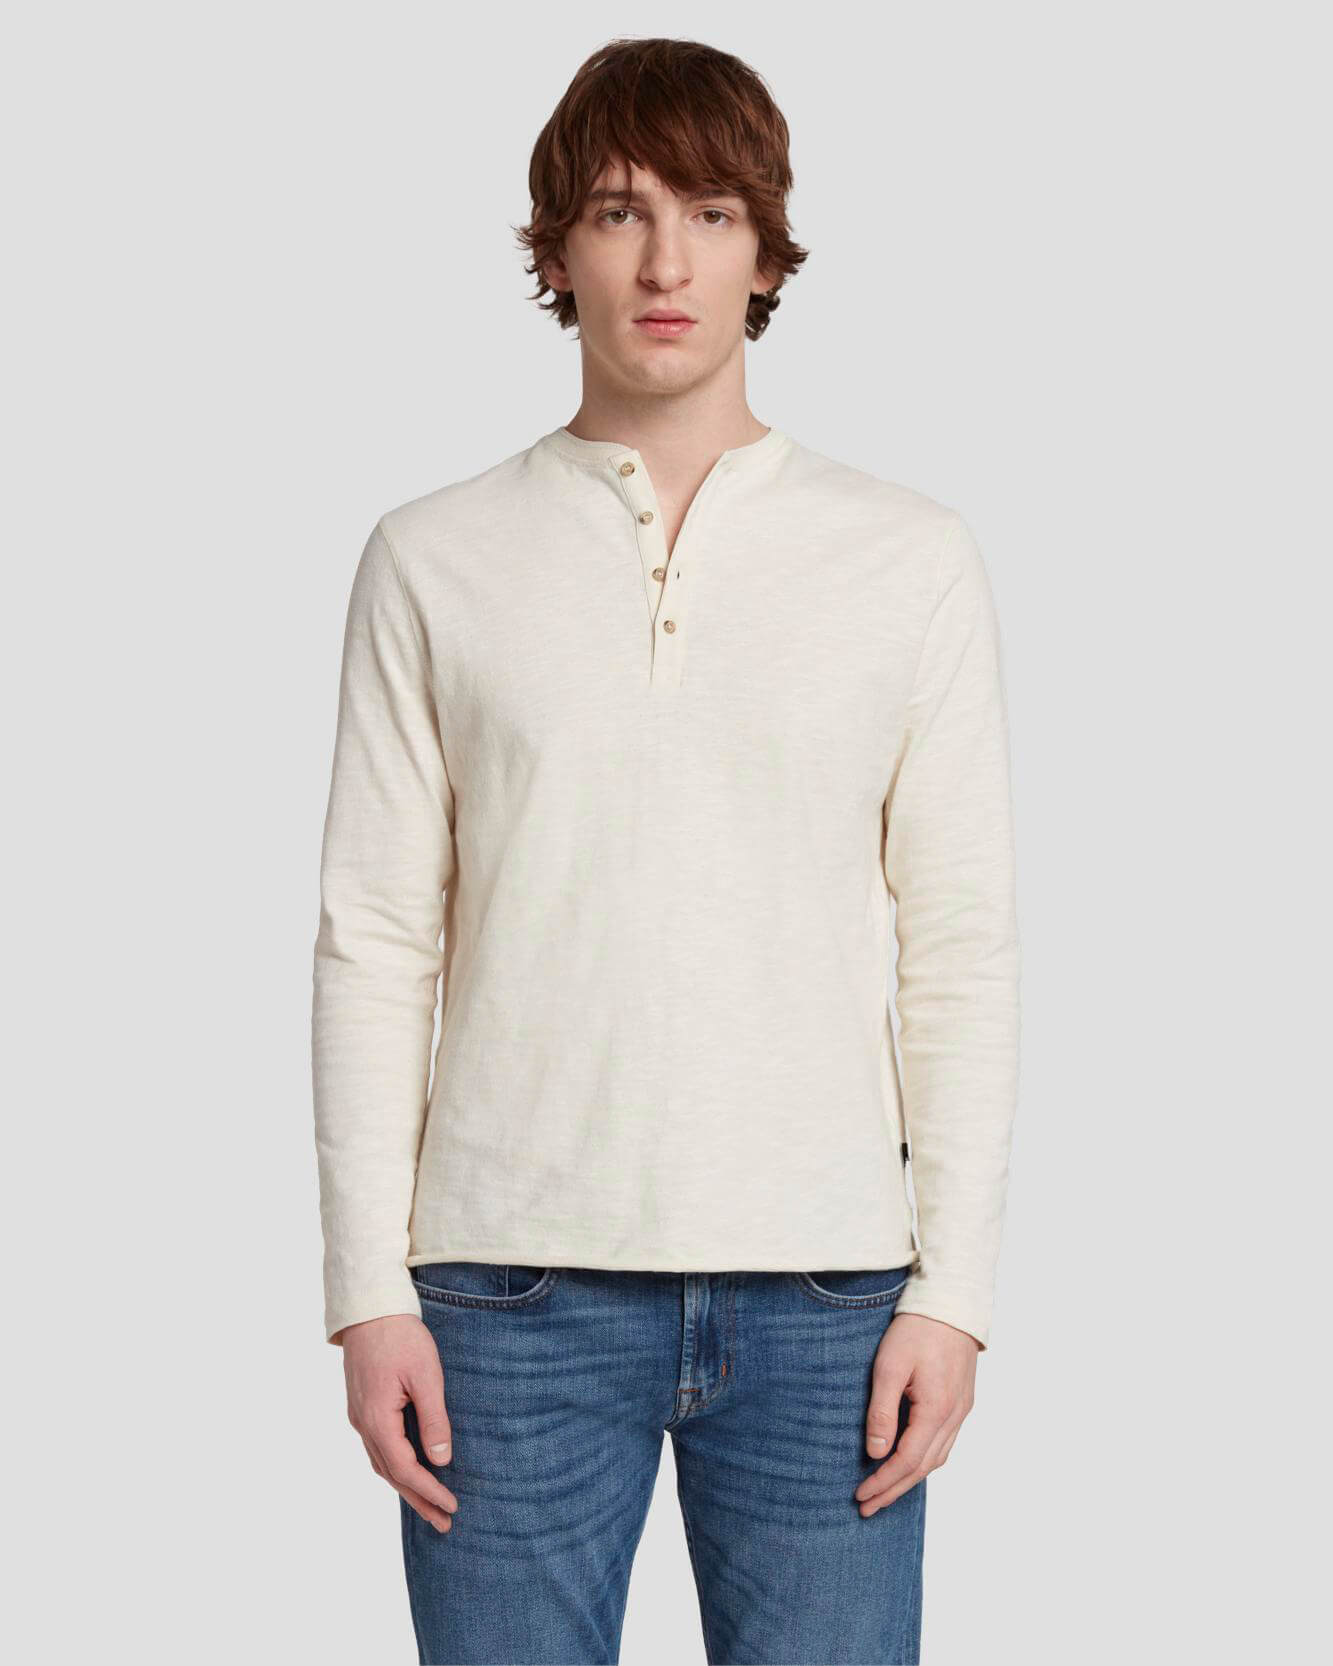 7 For All Mankind Long Sleeve Henley in Dover White 7MSPMH37DRW